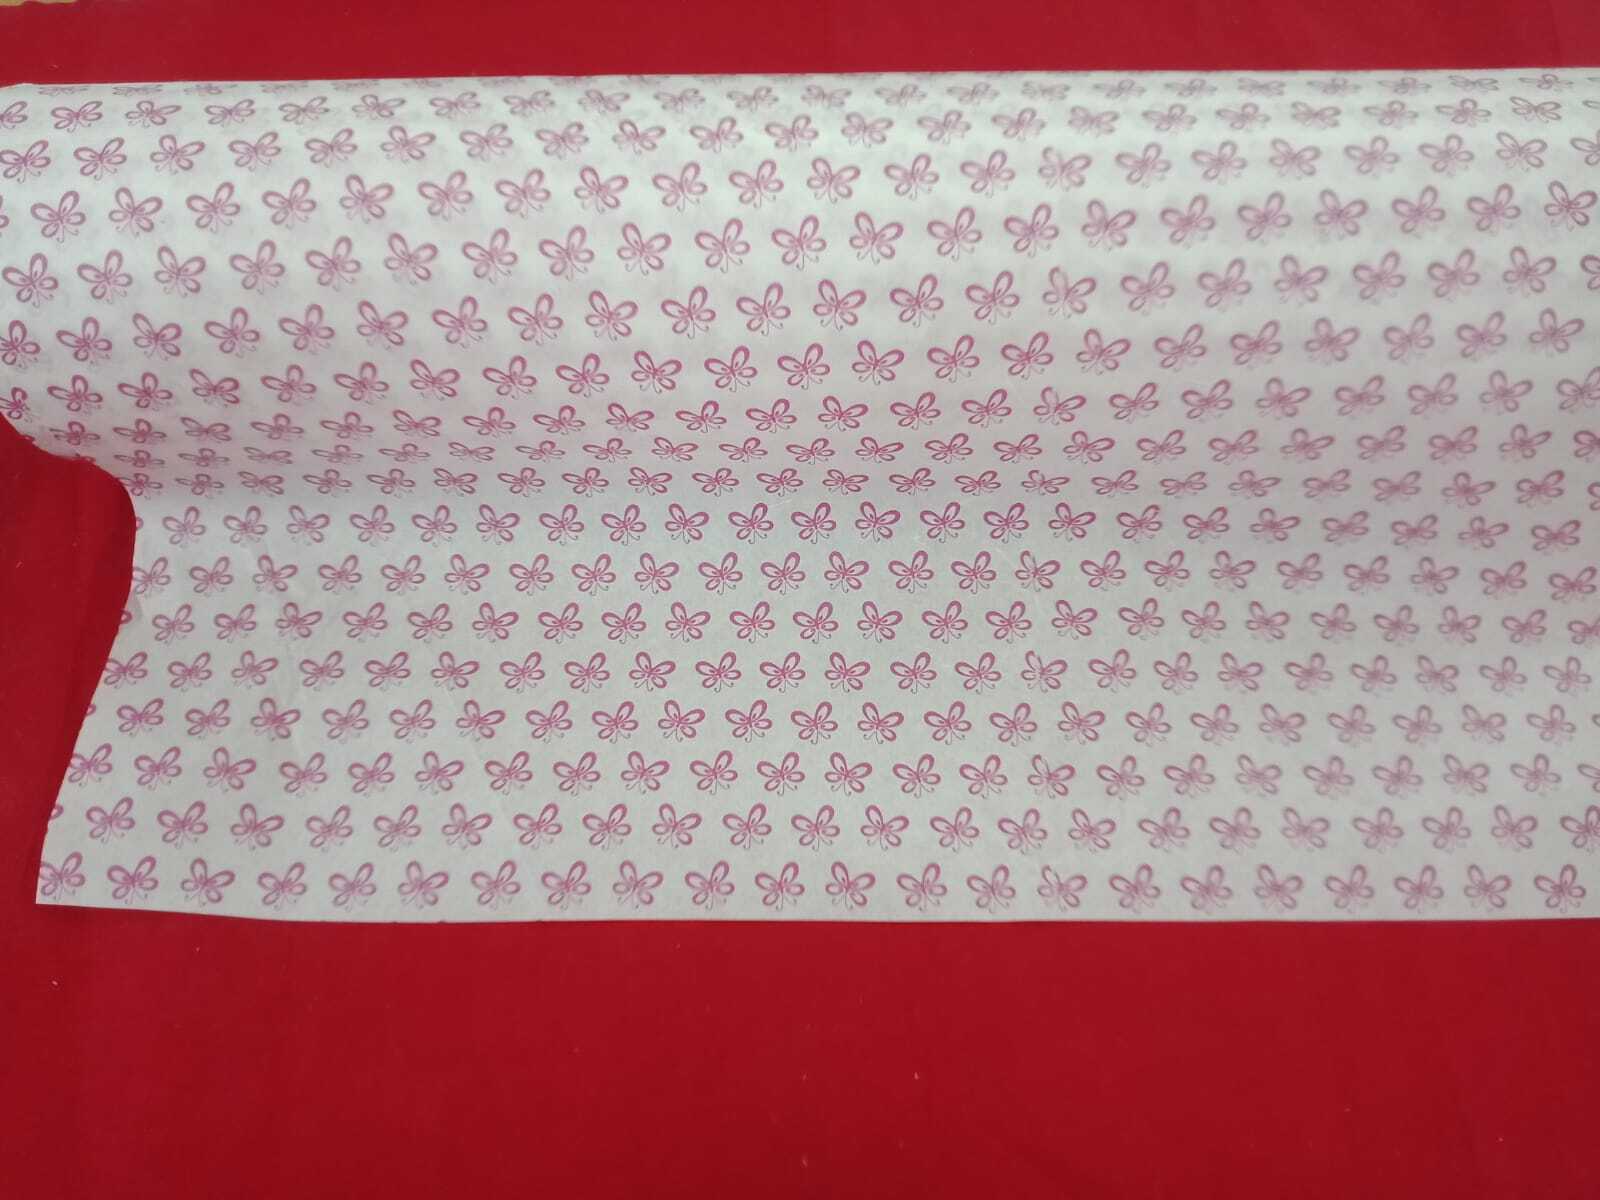 Silicon coated paper (printed)